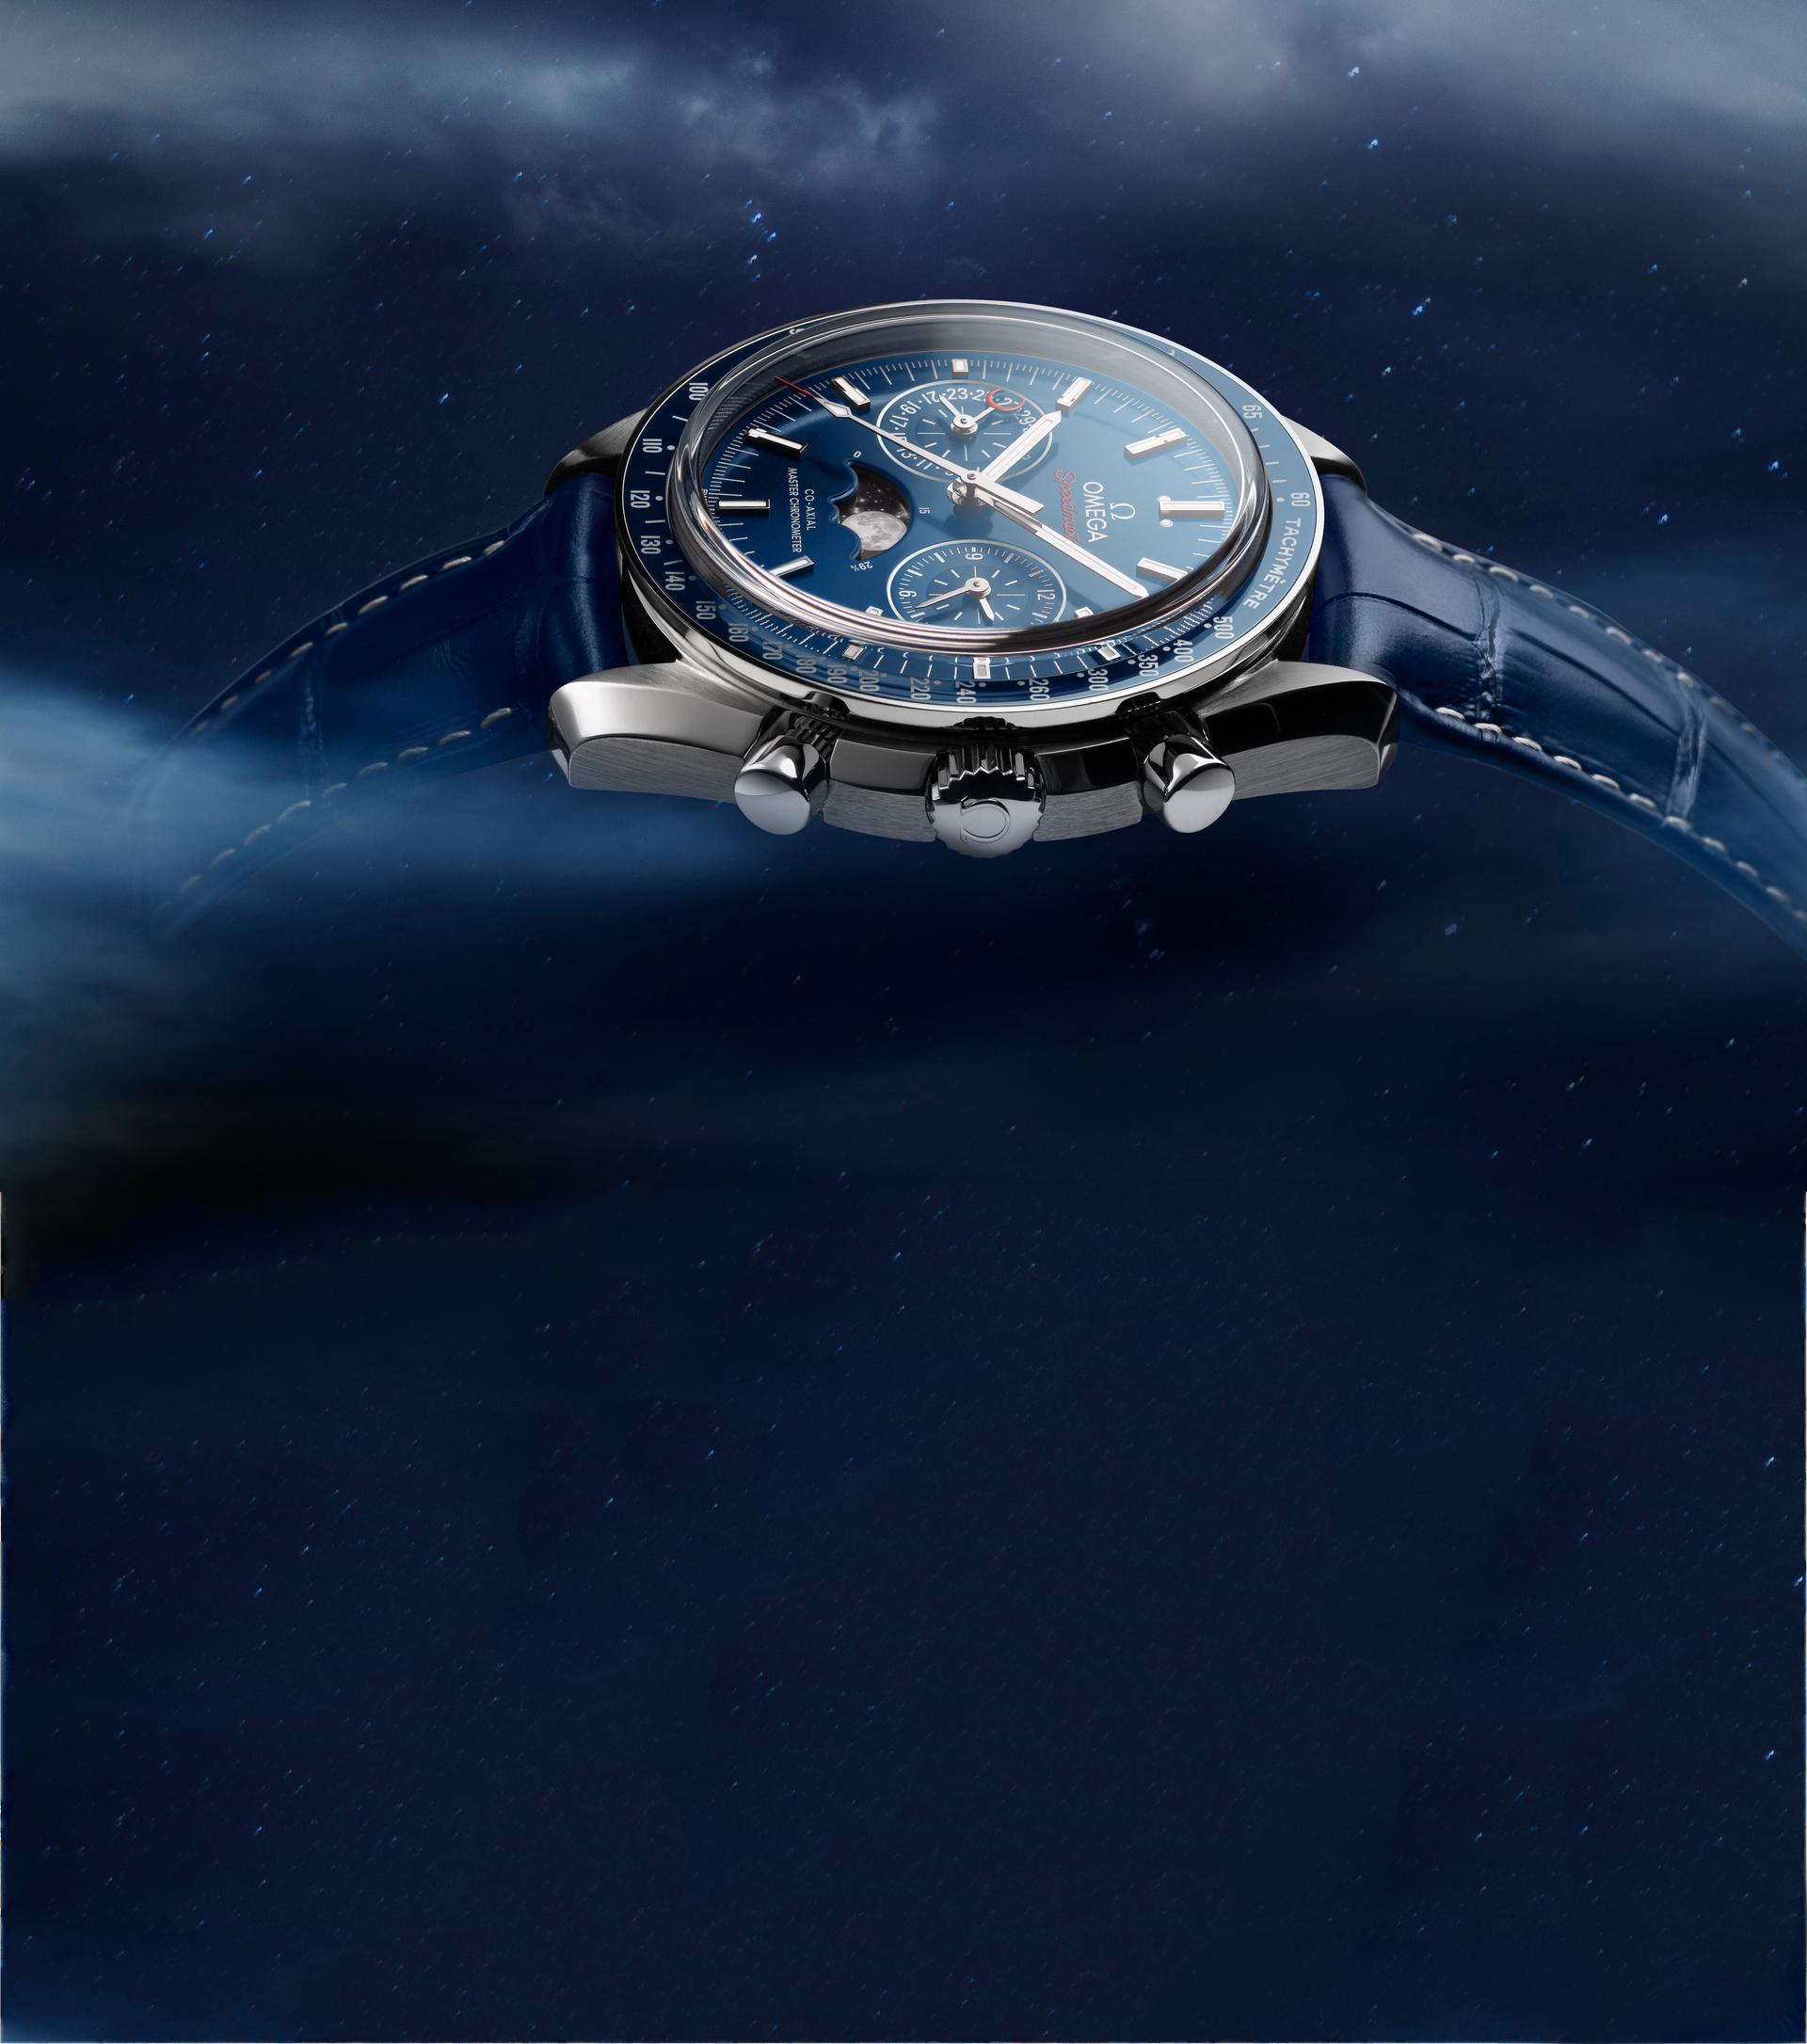 Year-in-space astronaut Scott Kelly named Breitling watches ambassador |  collectSPACE